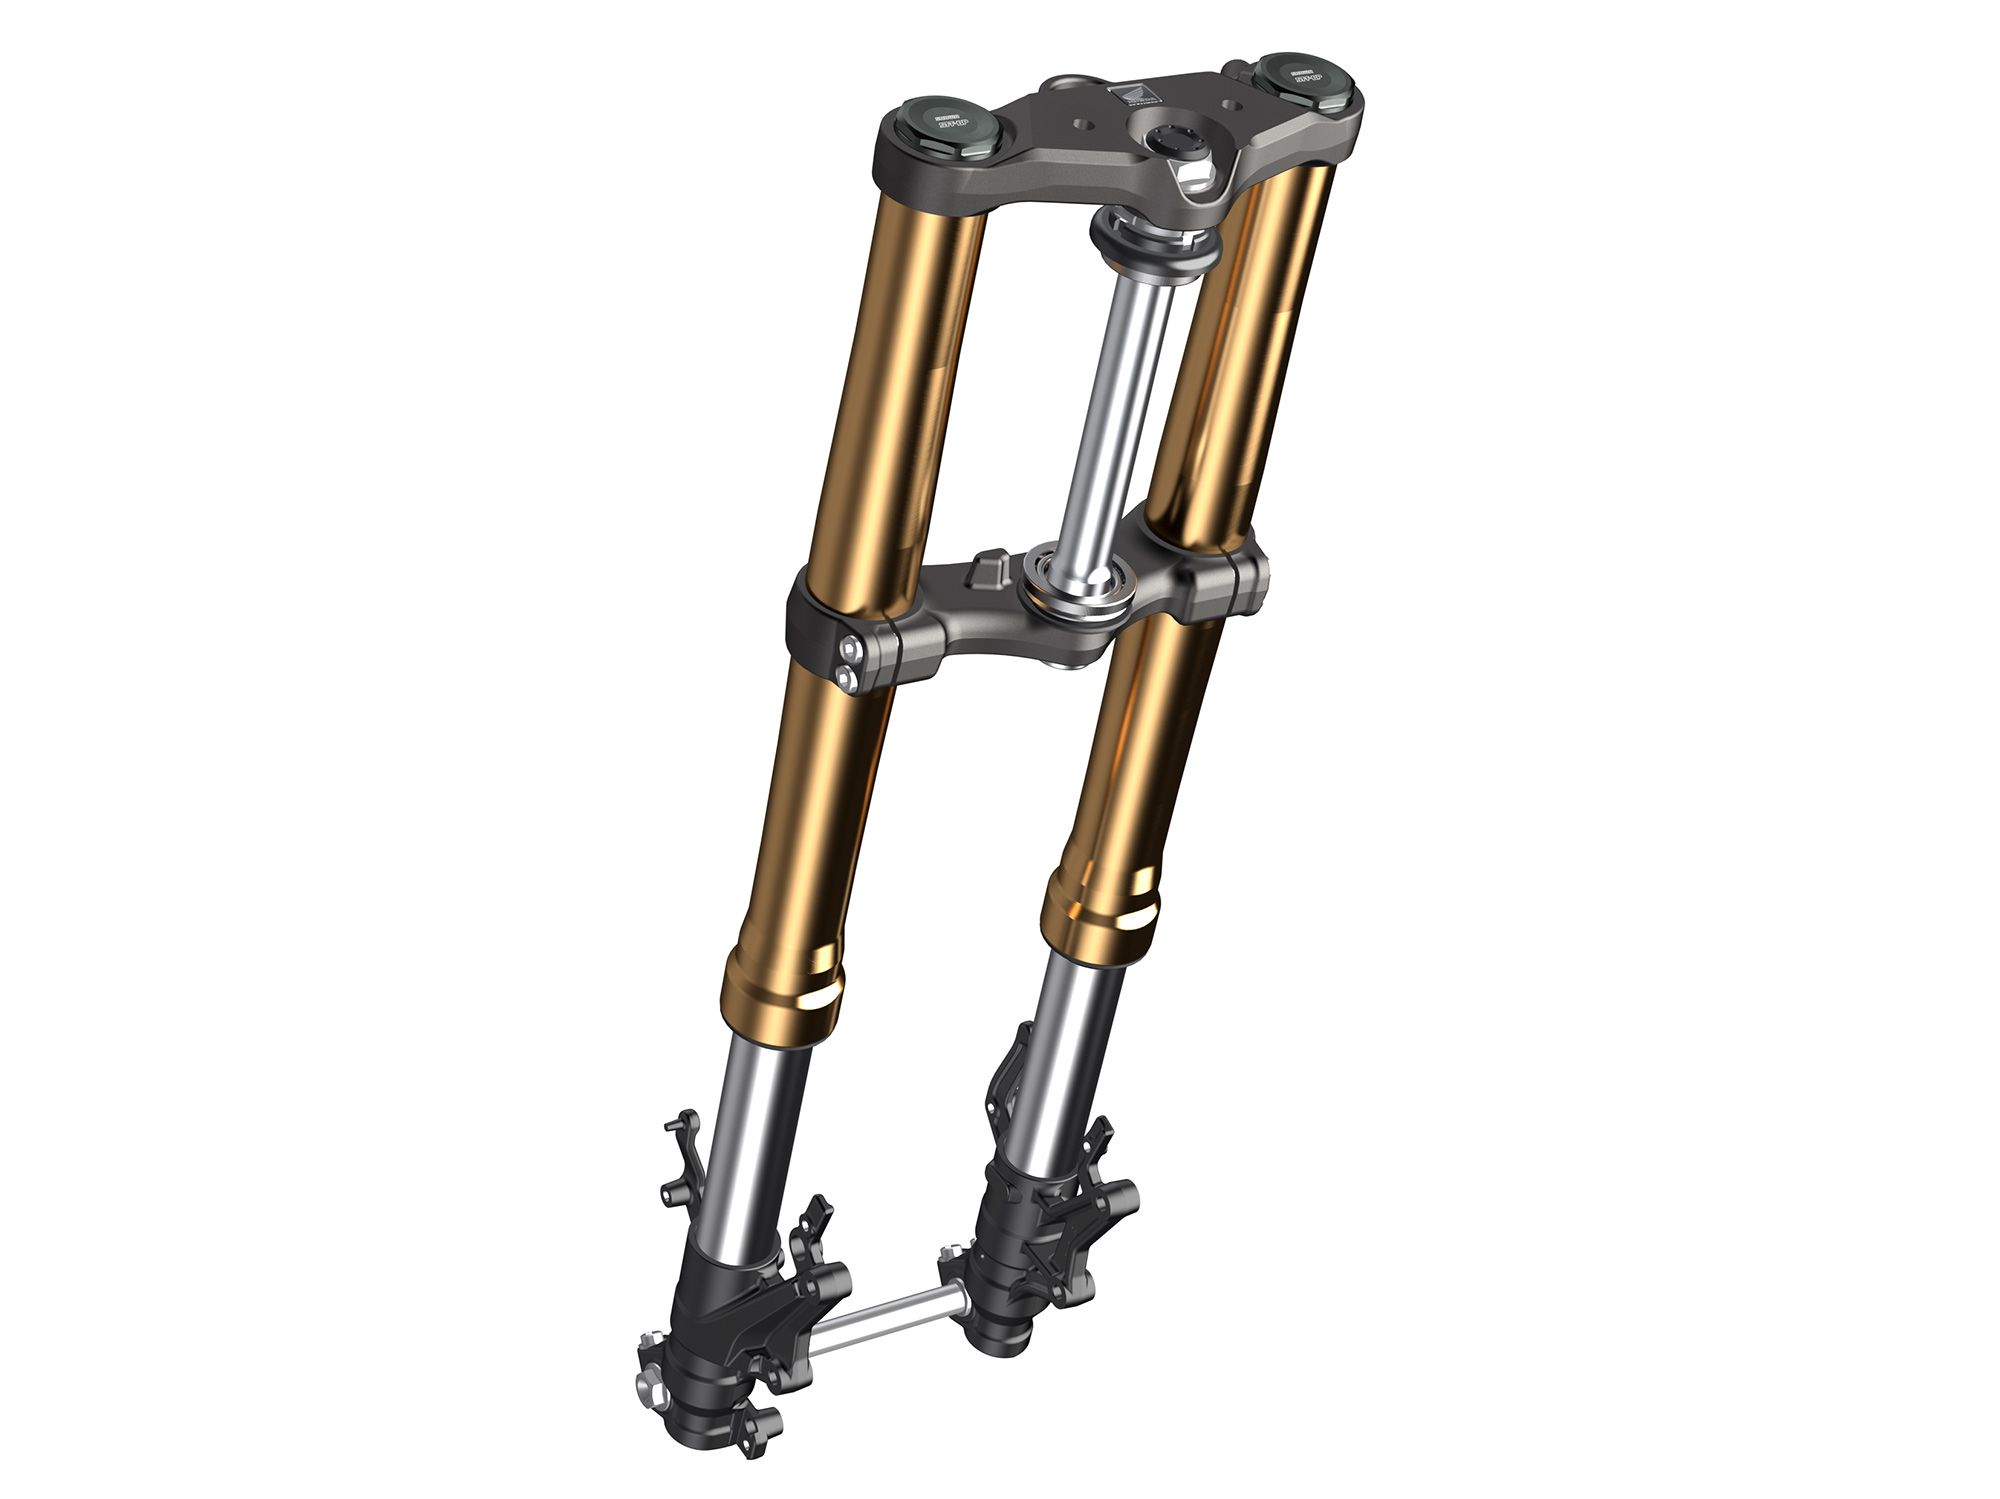 The previous year model's conventional fork has been replaced with a Showa 41mm inverted Separate Function Fork Big Piston (SFF-BP) fork with 5.9 inches of cushion stroke, held by new upper and lower triple clamps.